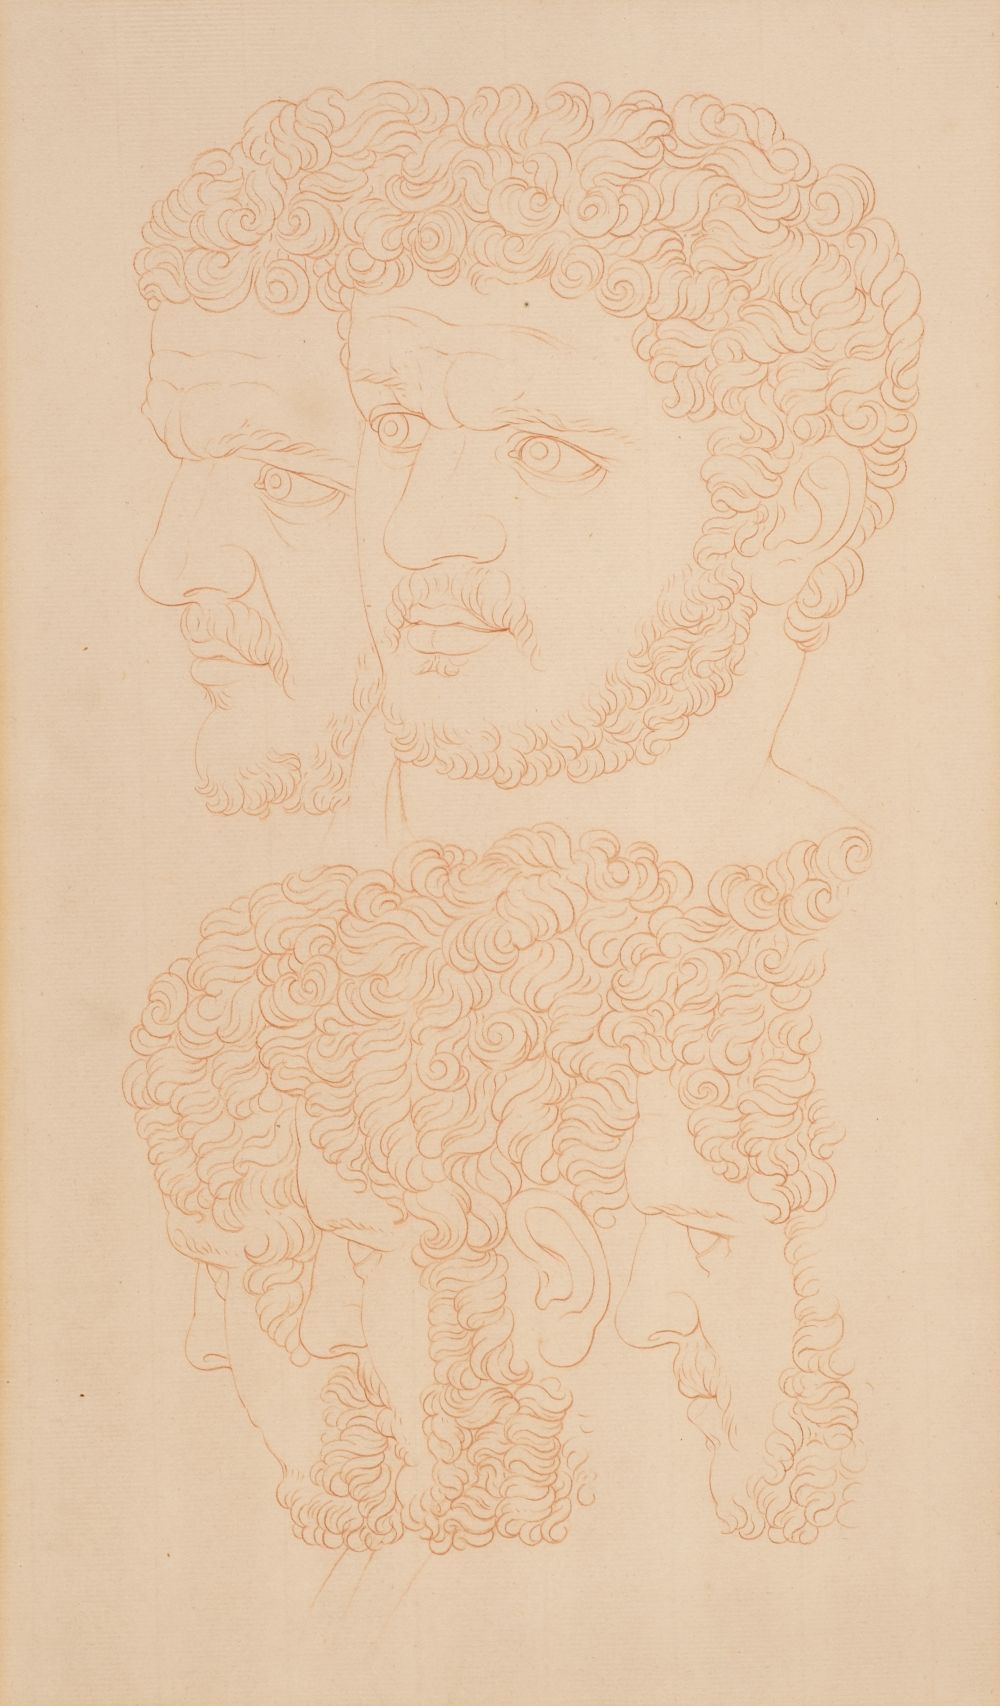 * Hussey, Giles (1710-1788, Attributed to), Bust of Caligula, sanguine chalk on laid paper